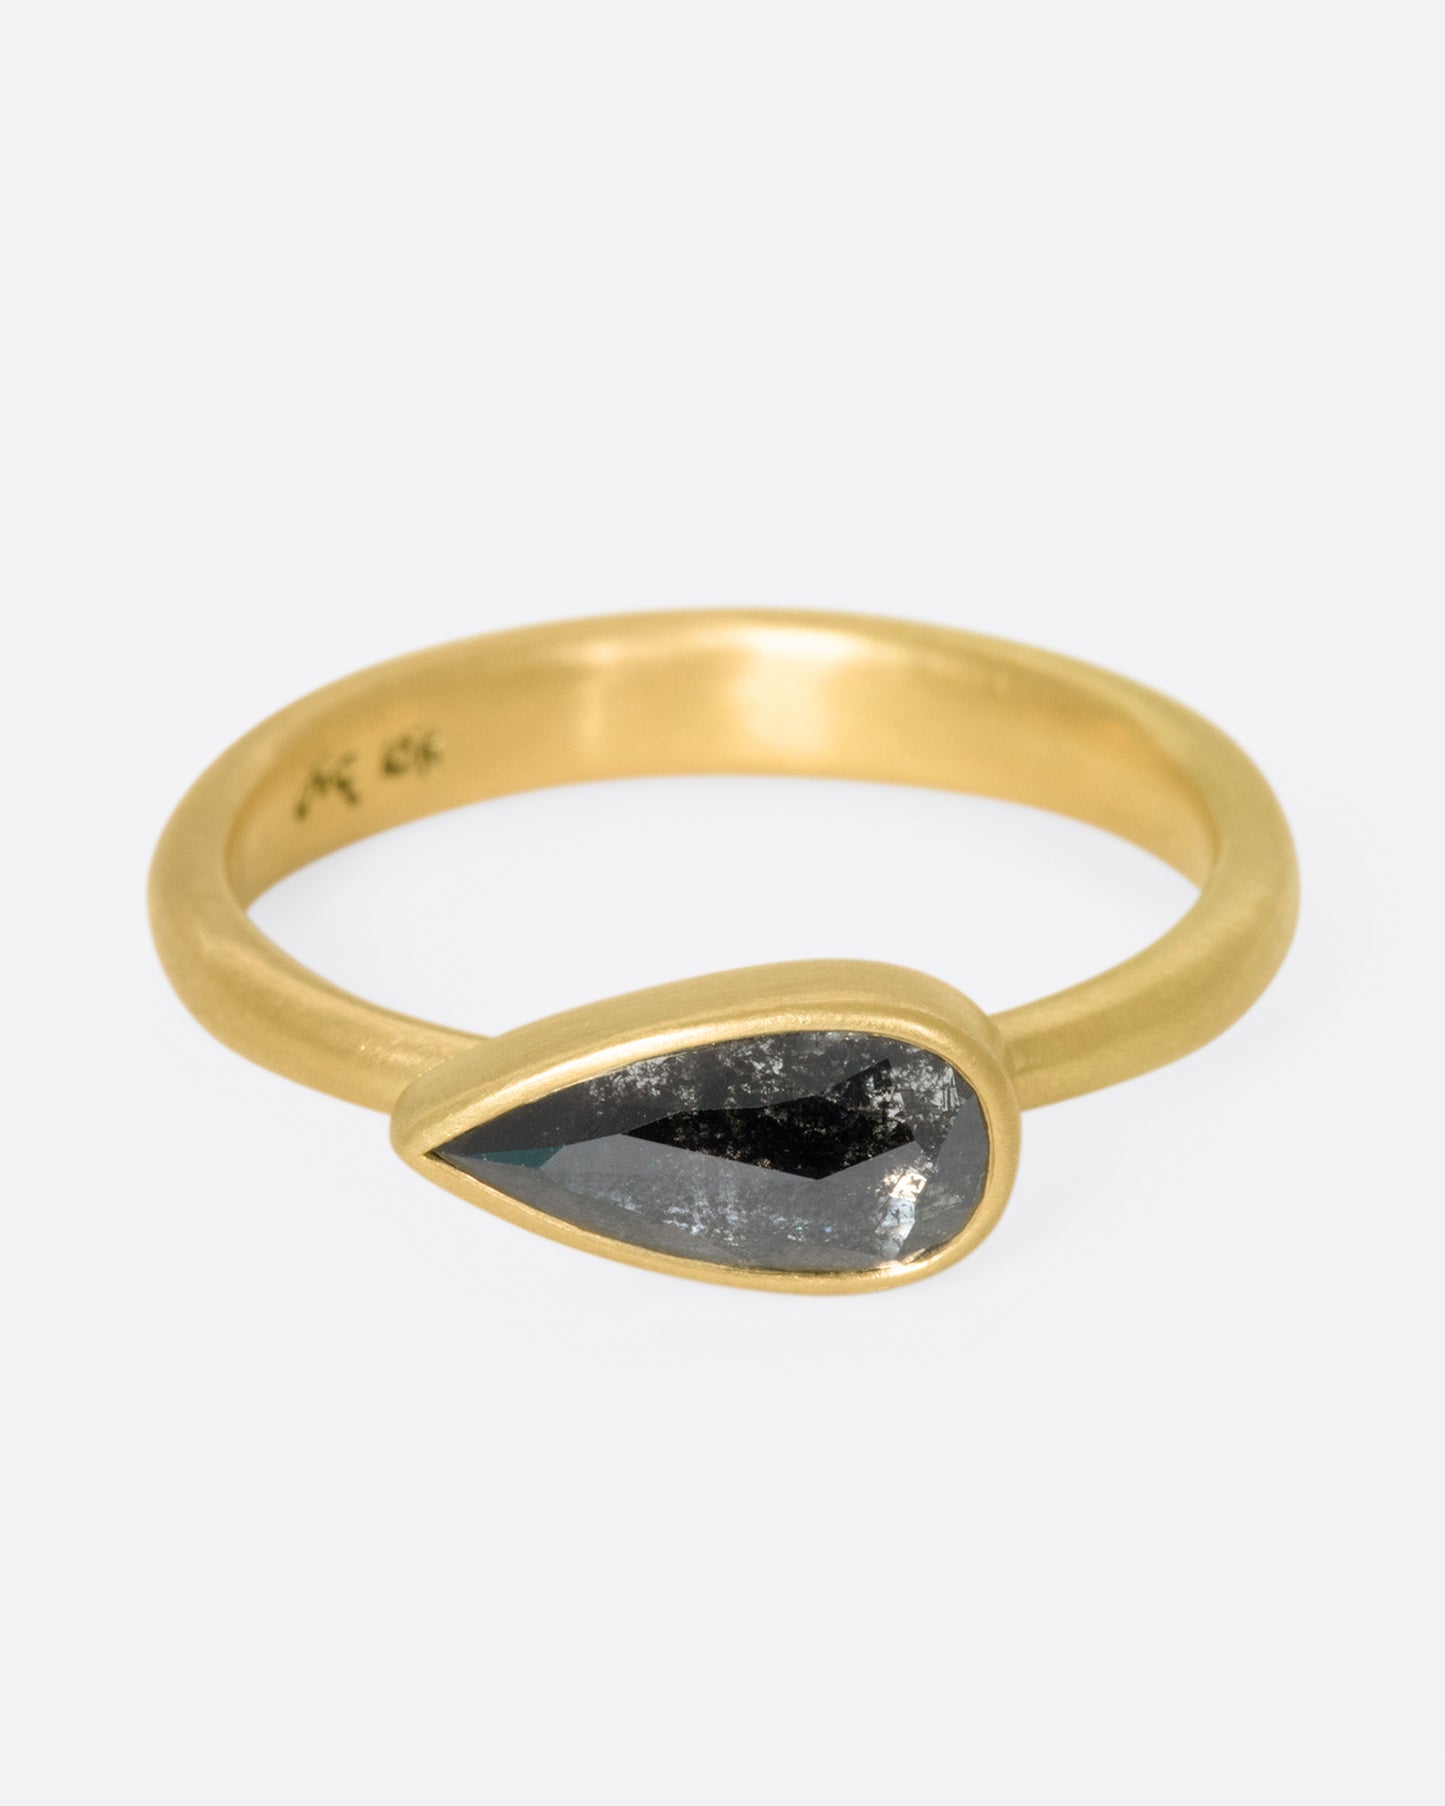 A solitaire ring with a dark, cloudy diamond set on its side